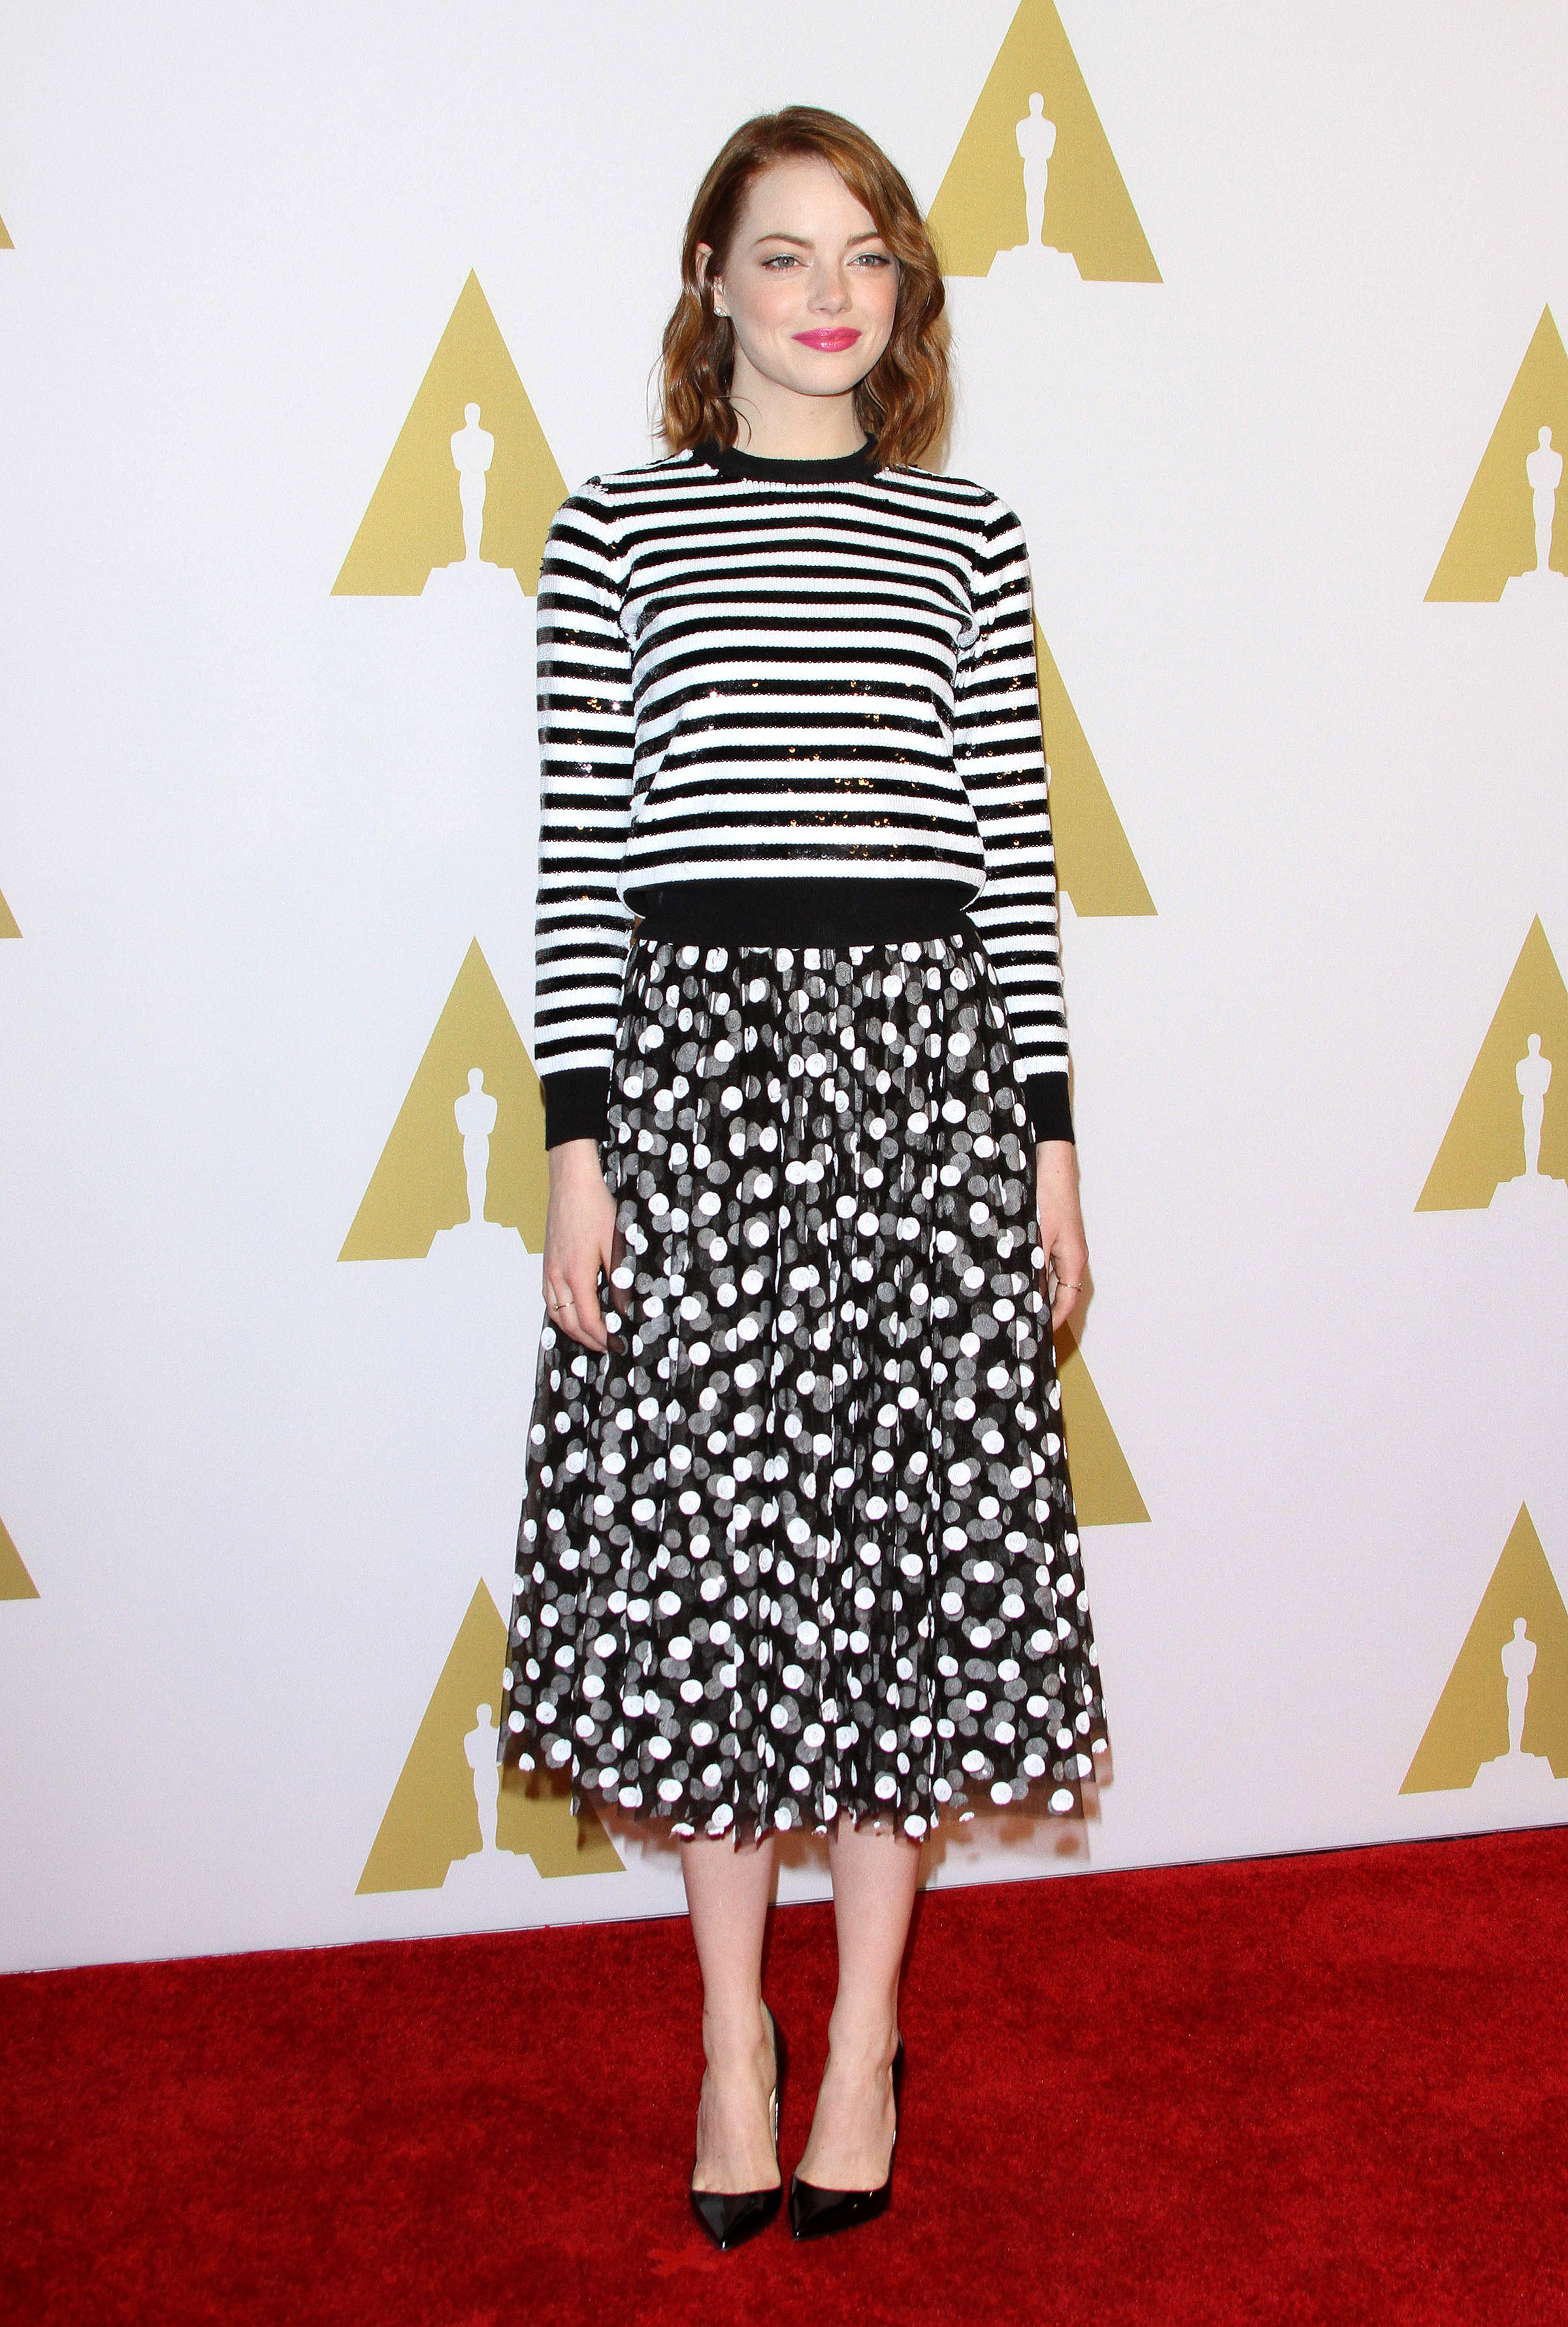 Well Played: Emma Stone in Michael Kors at the Oscar Nominee Luncheon